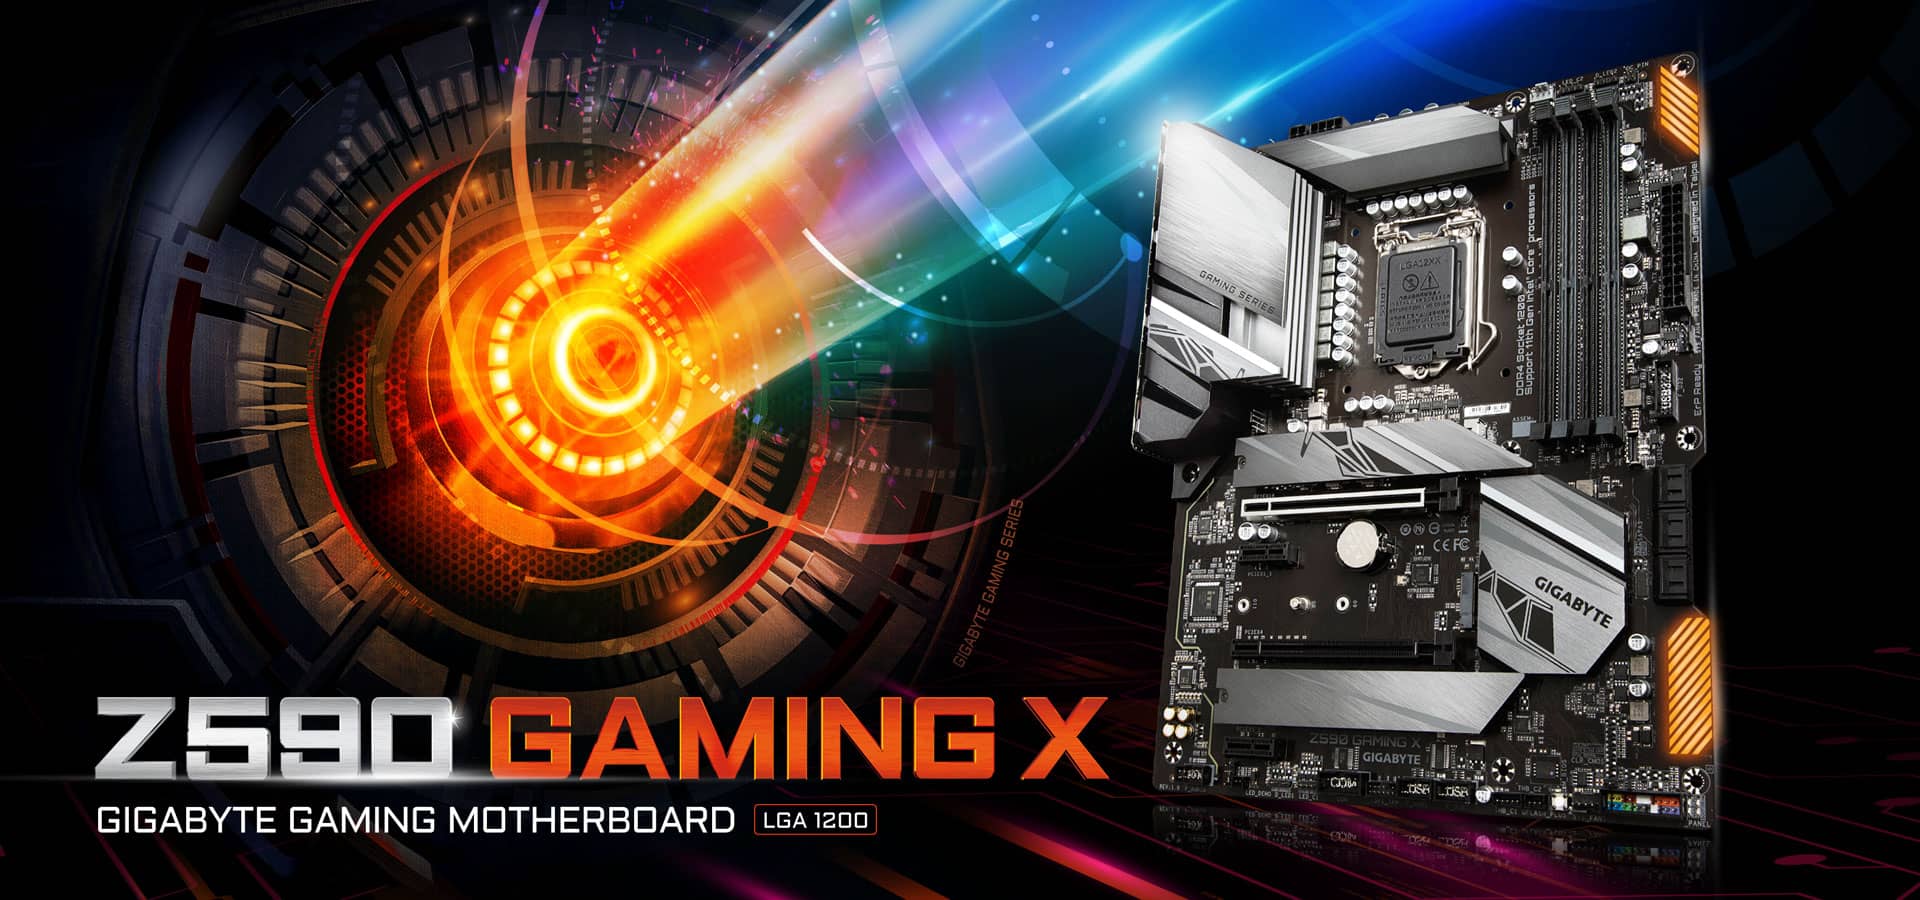 Z590 GAMING X (rev. 1.x) Key Features | Motherboard - GIGABYTE U.S.A.